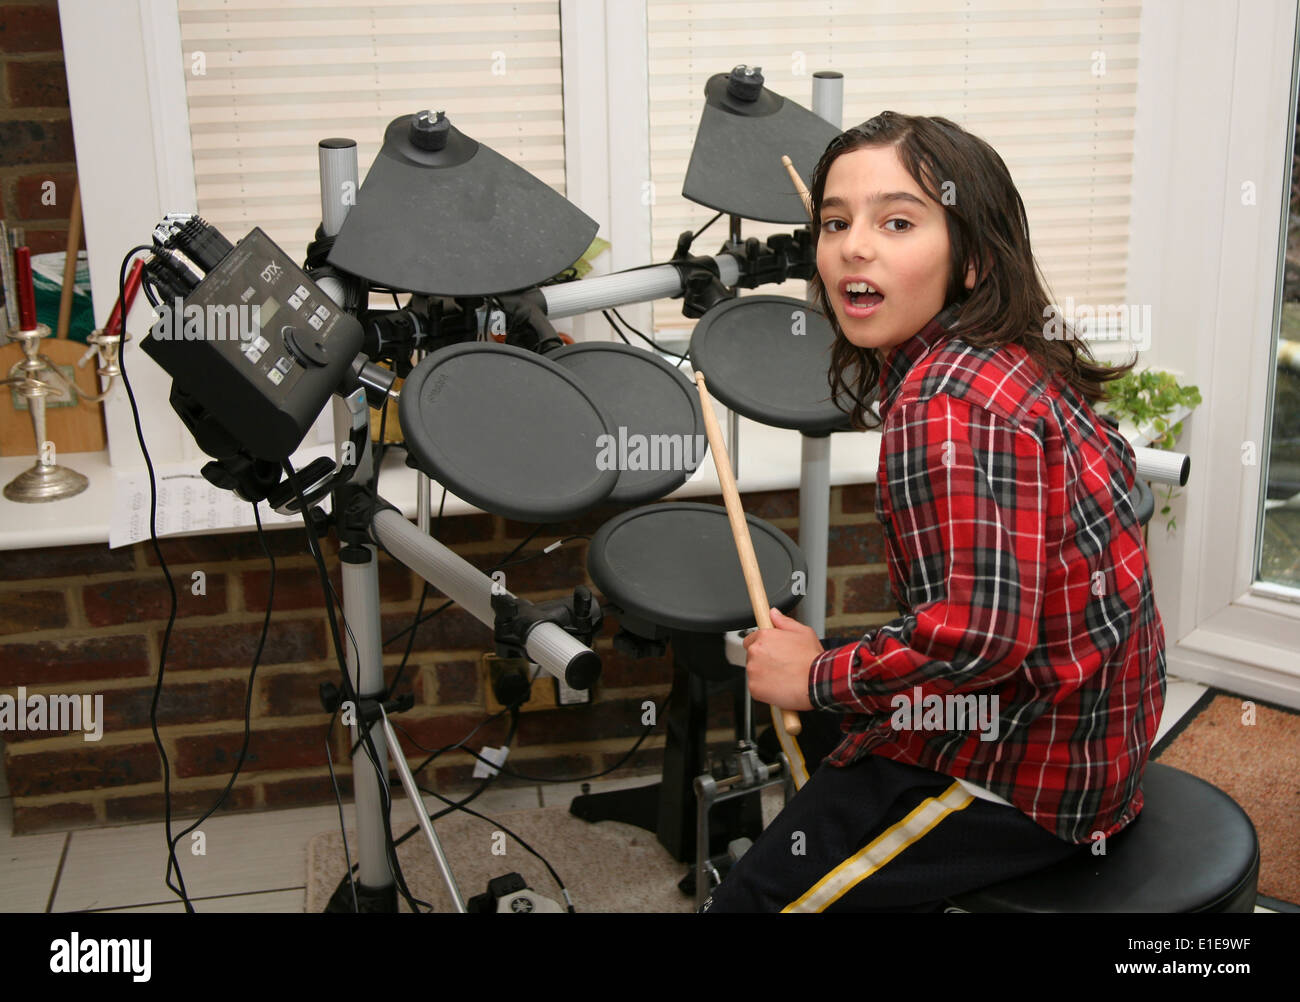 child playing drums Stock Photo